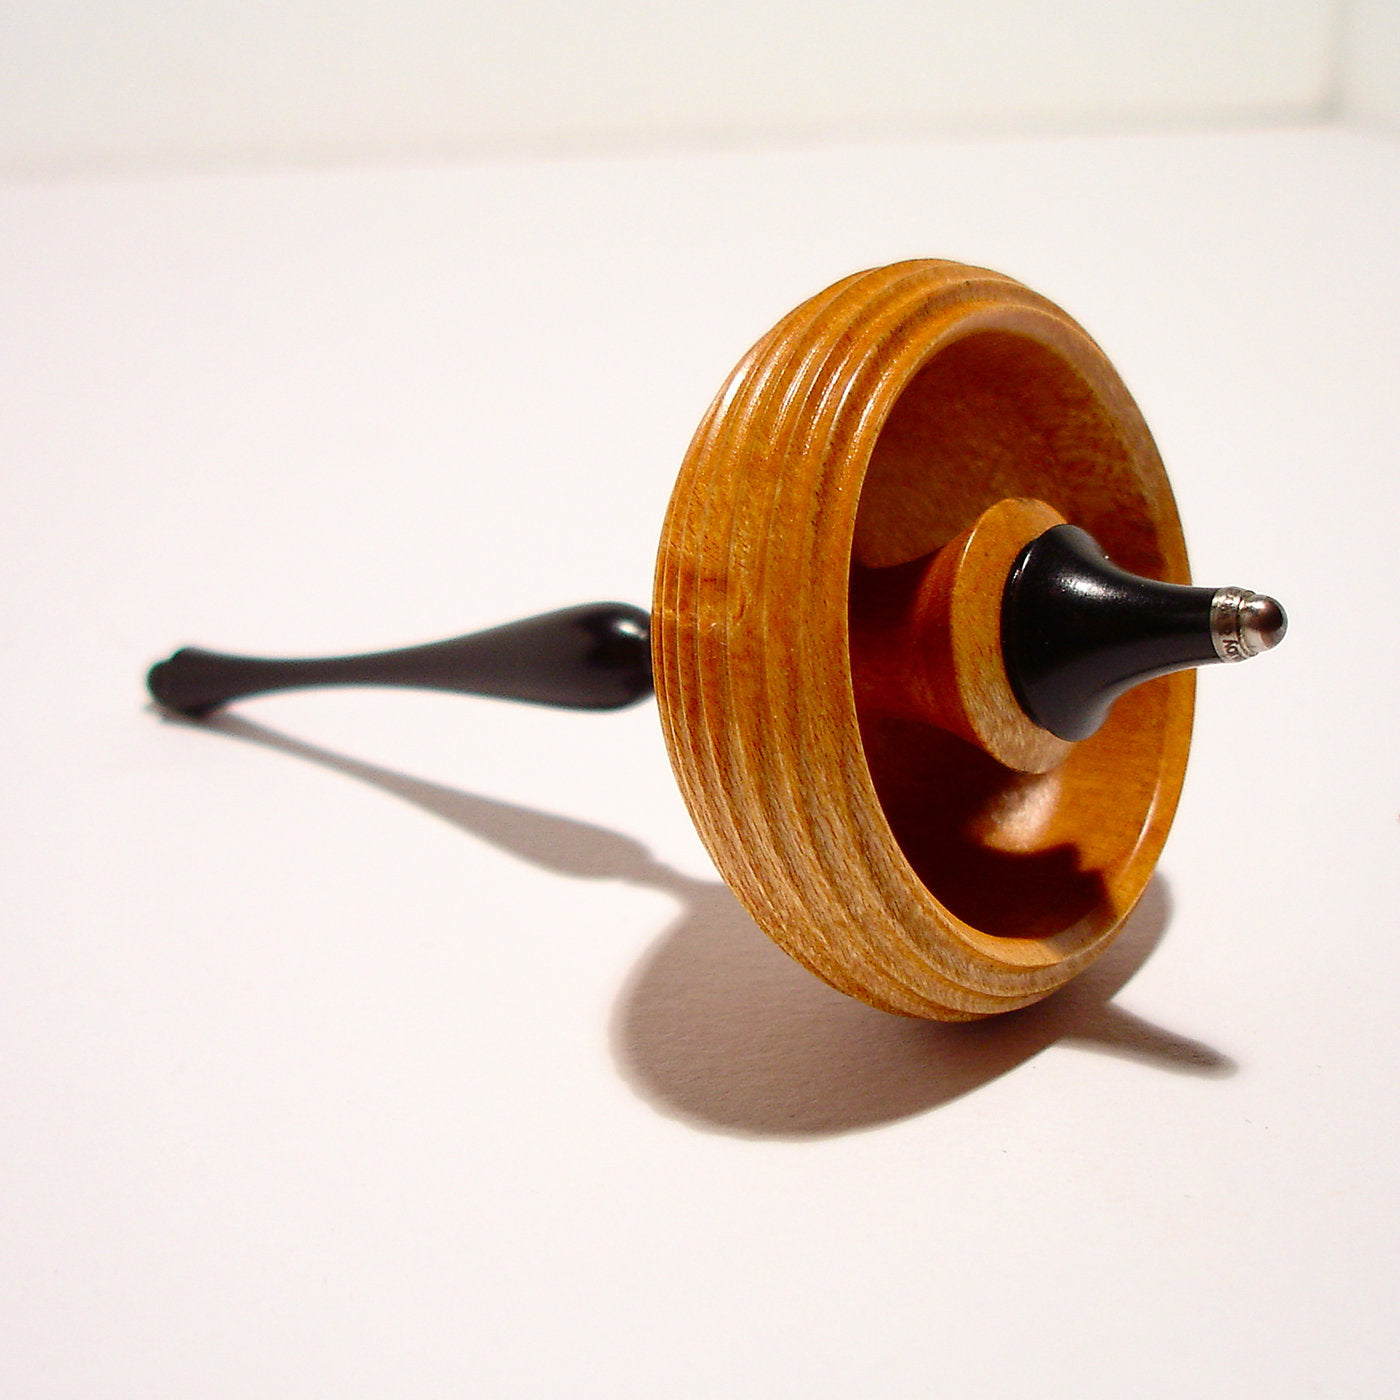 Ebony and Maple Spinning Top #2 - Alternative view 2